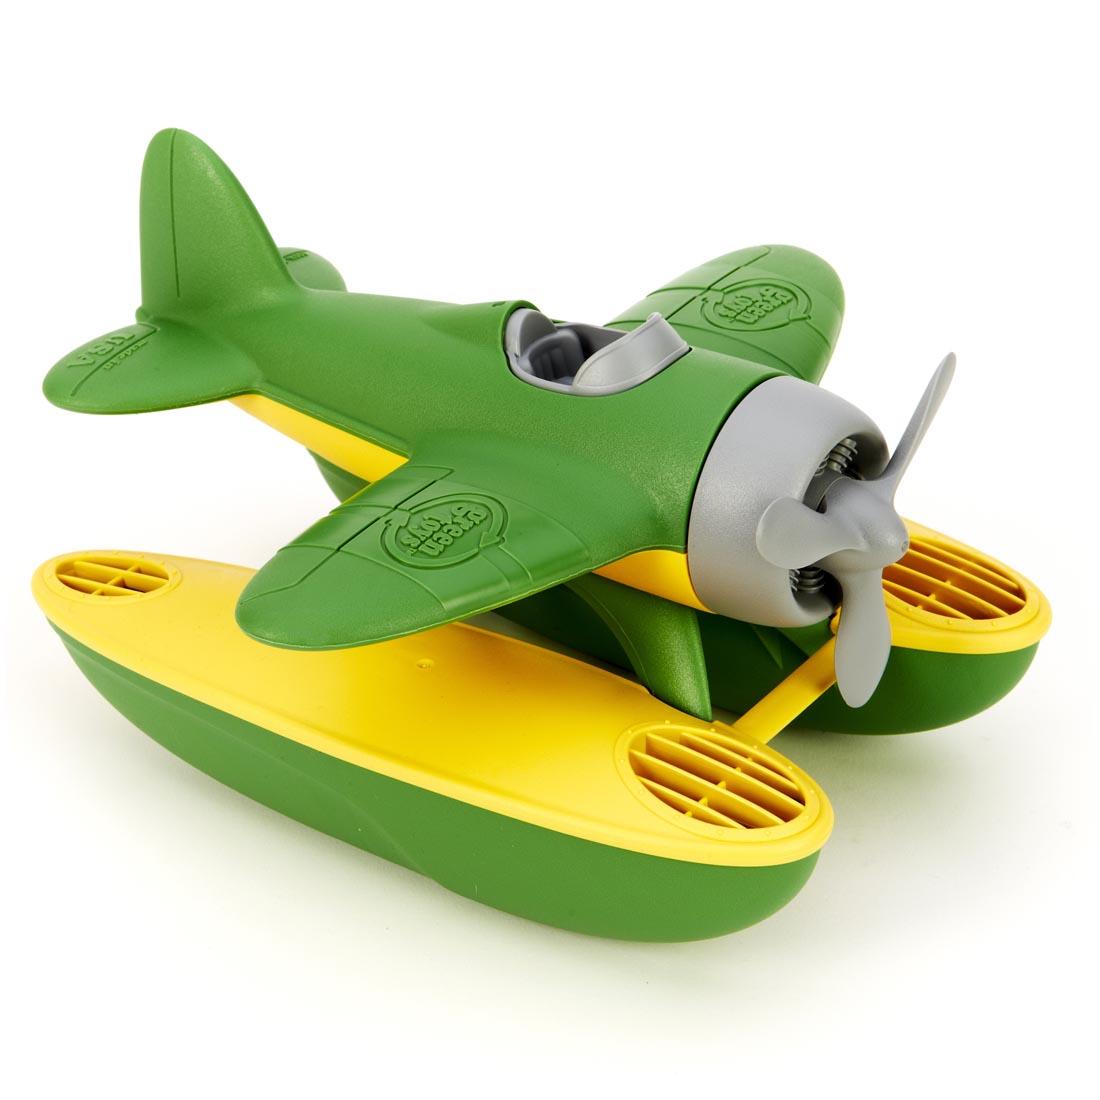 Green and yellow recycled plastic Green Toys Sea Plane